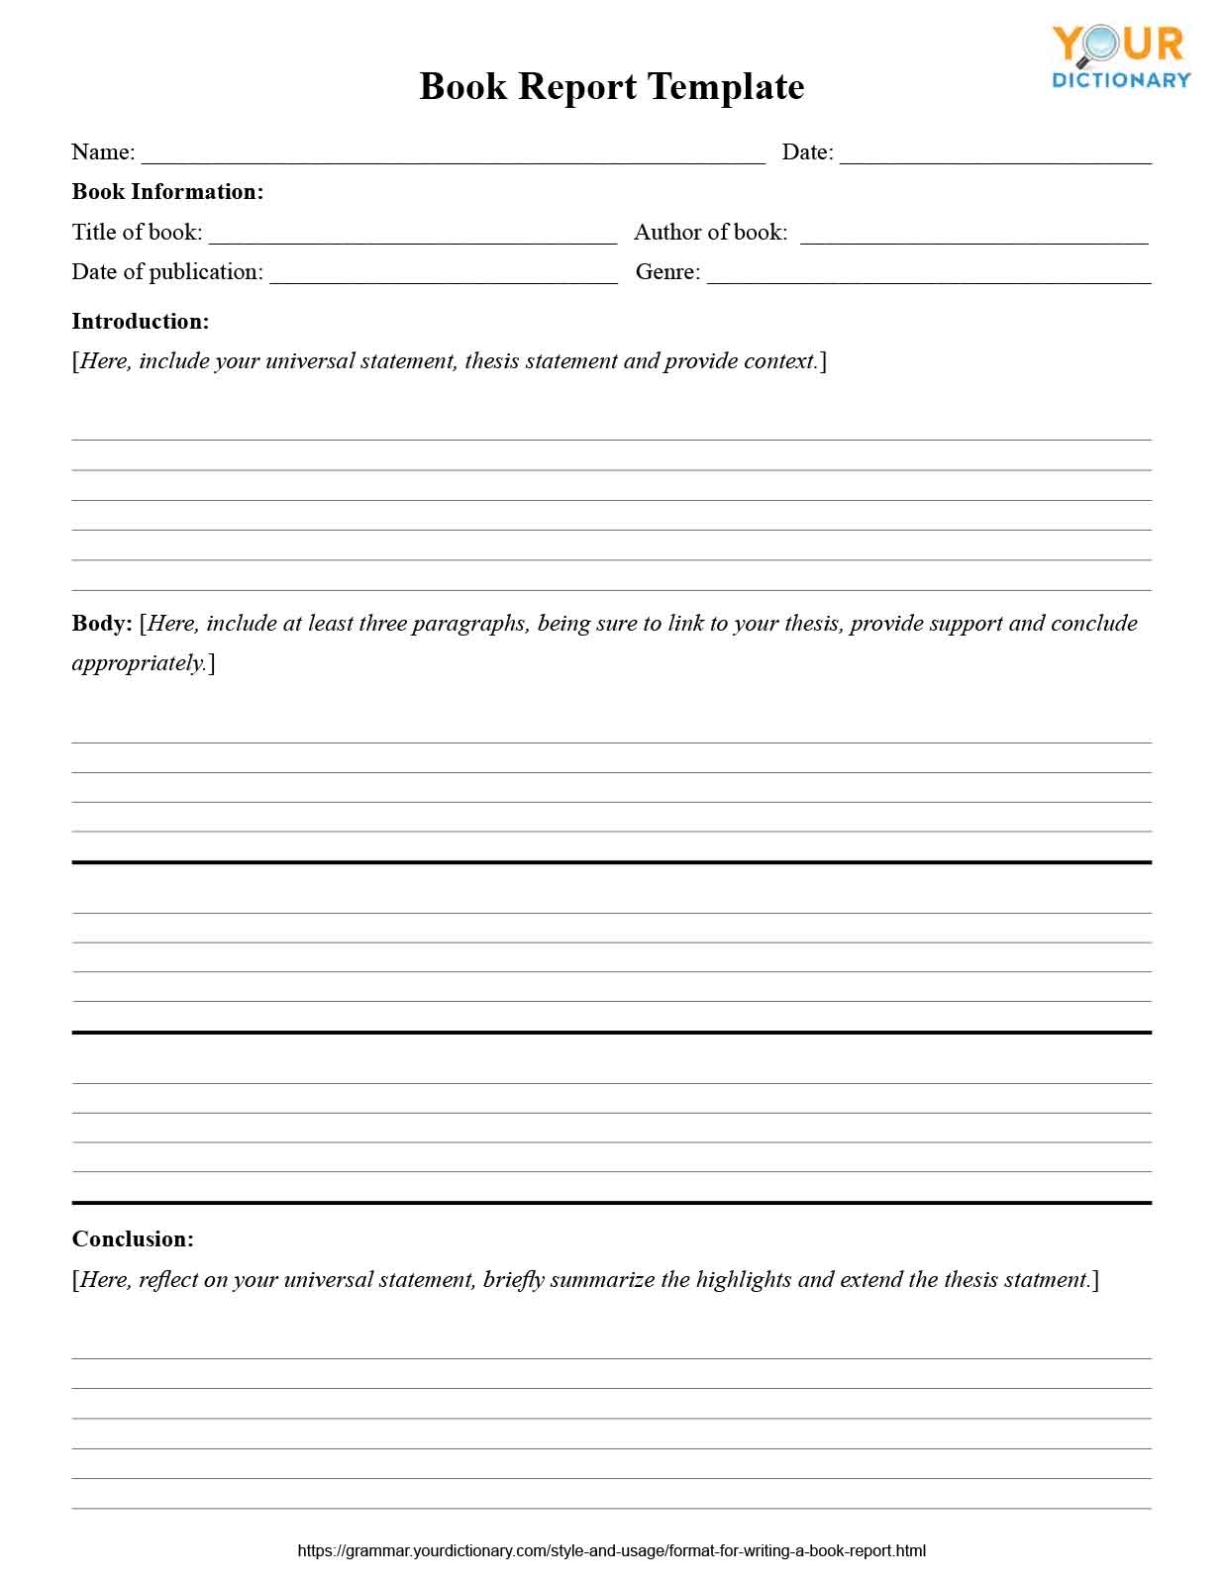 Format For Writing A Book Report With High School Book Report Template